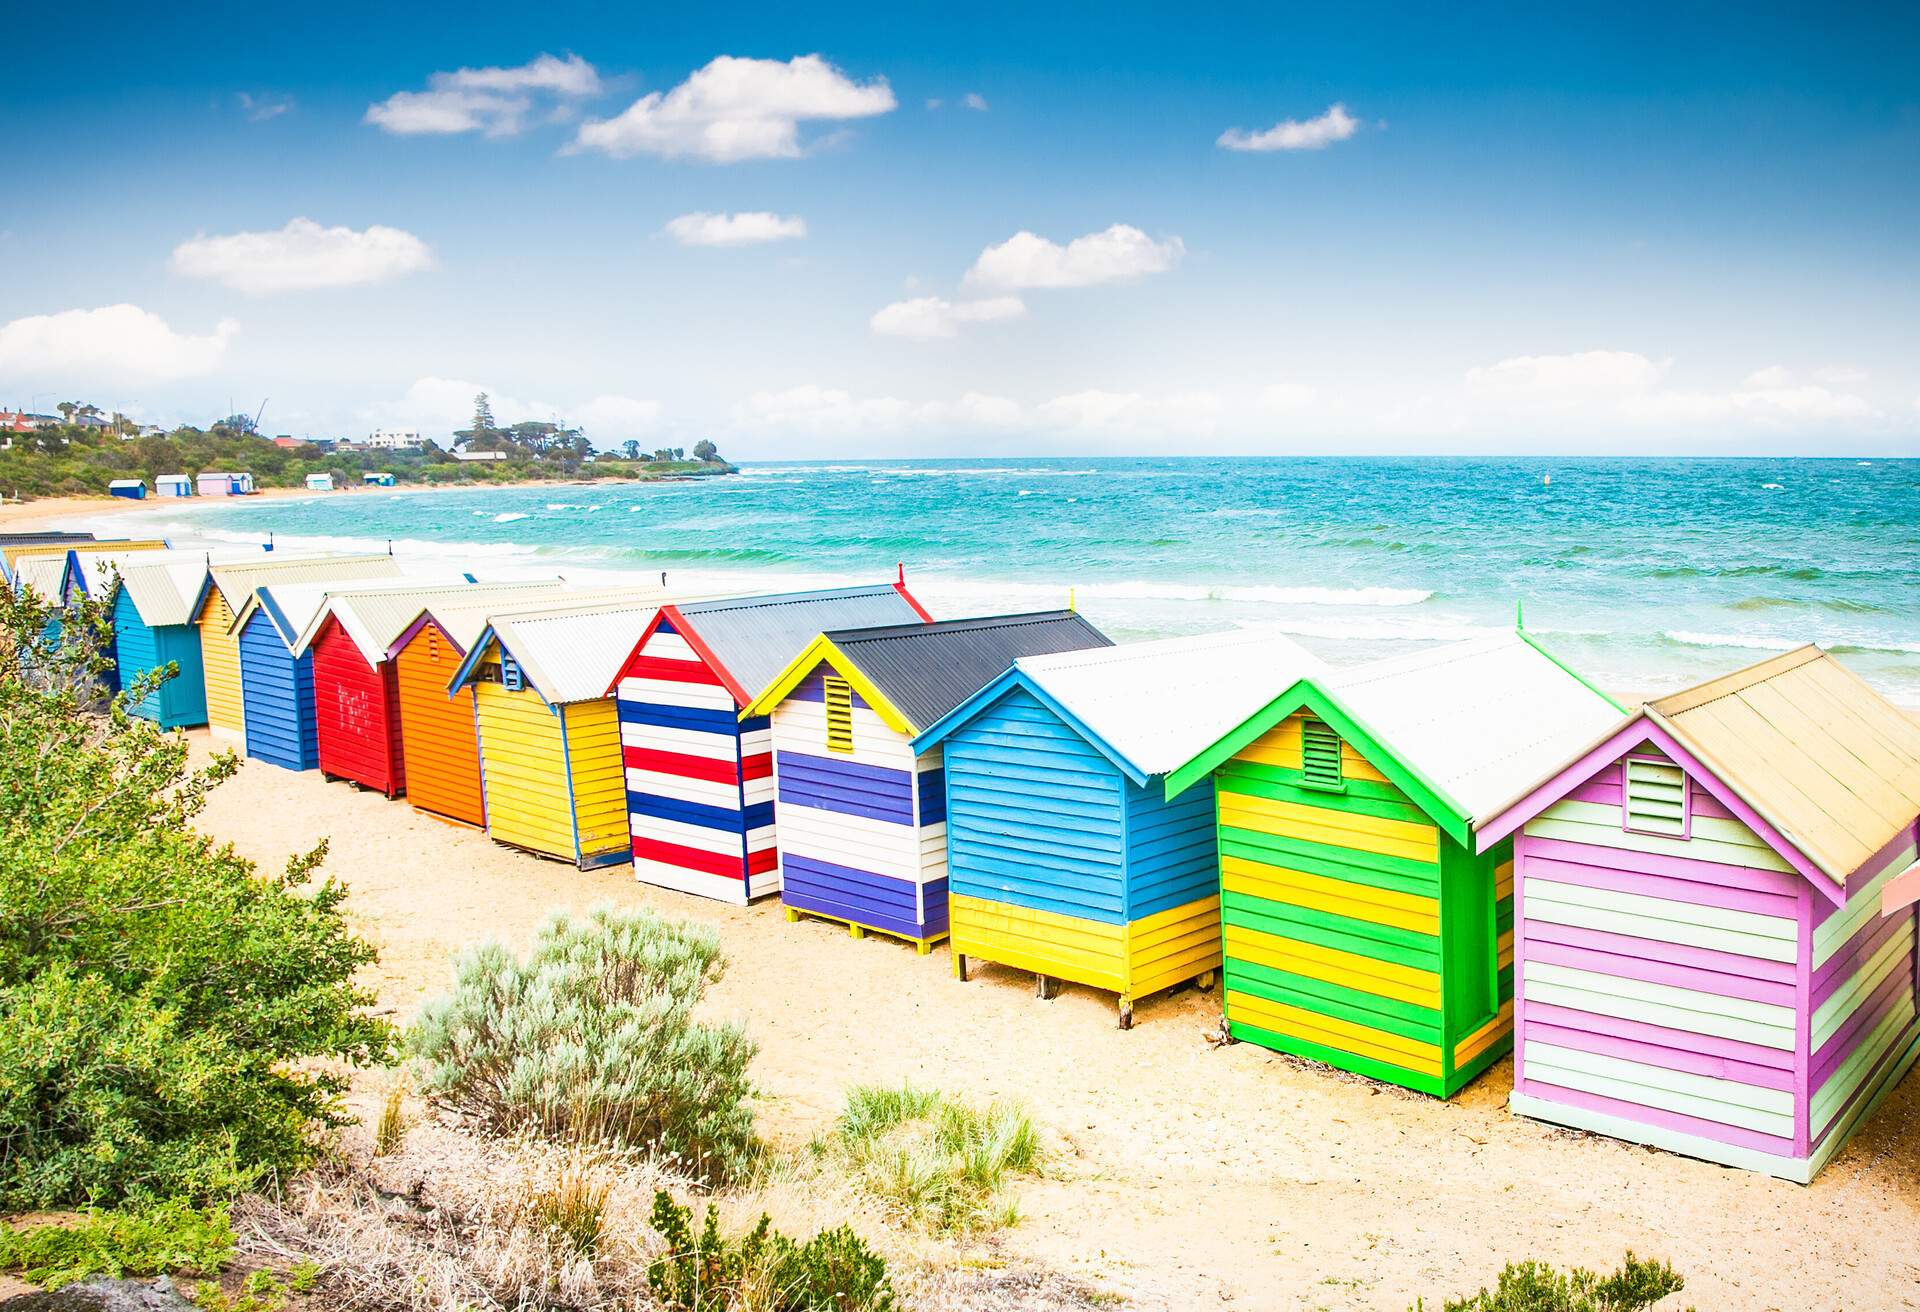 Beautiful Bathing houses on white sandy beach at Brighton beach in Melbourne, Australia.; Shutterstock ID 249505867; SF SSA Case with Manager Approval: SF6759285; Job: ; Client/Licensee: ; Other: